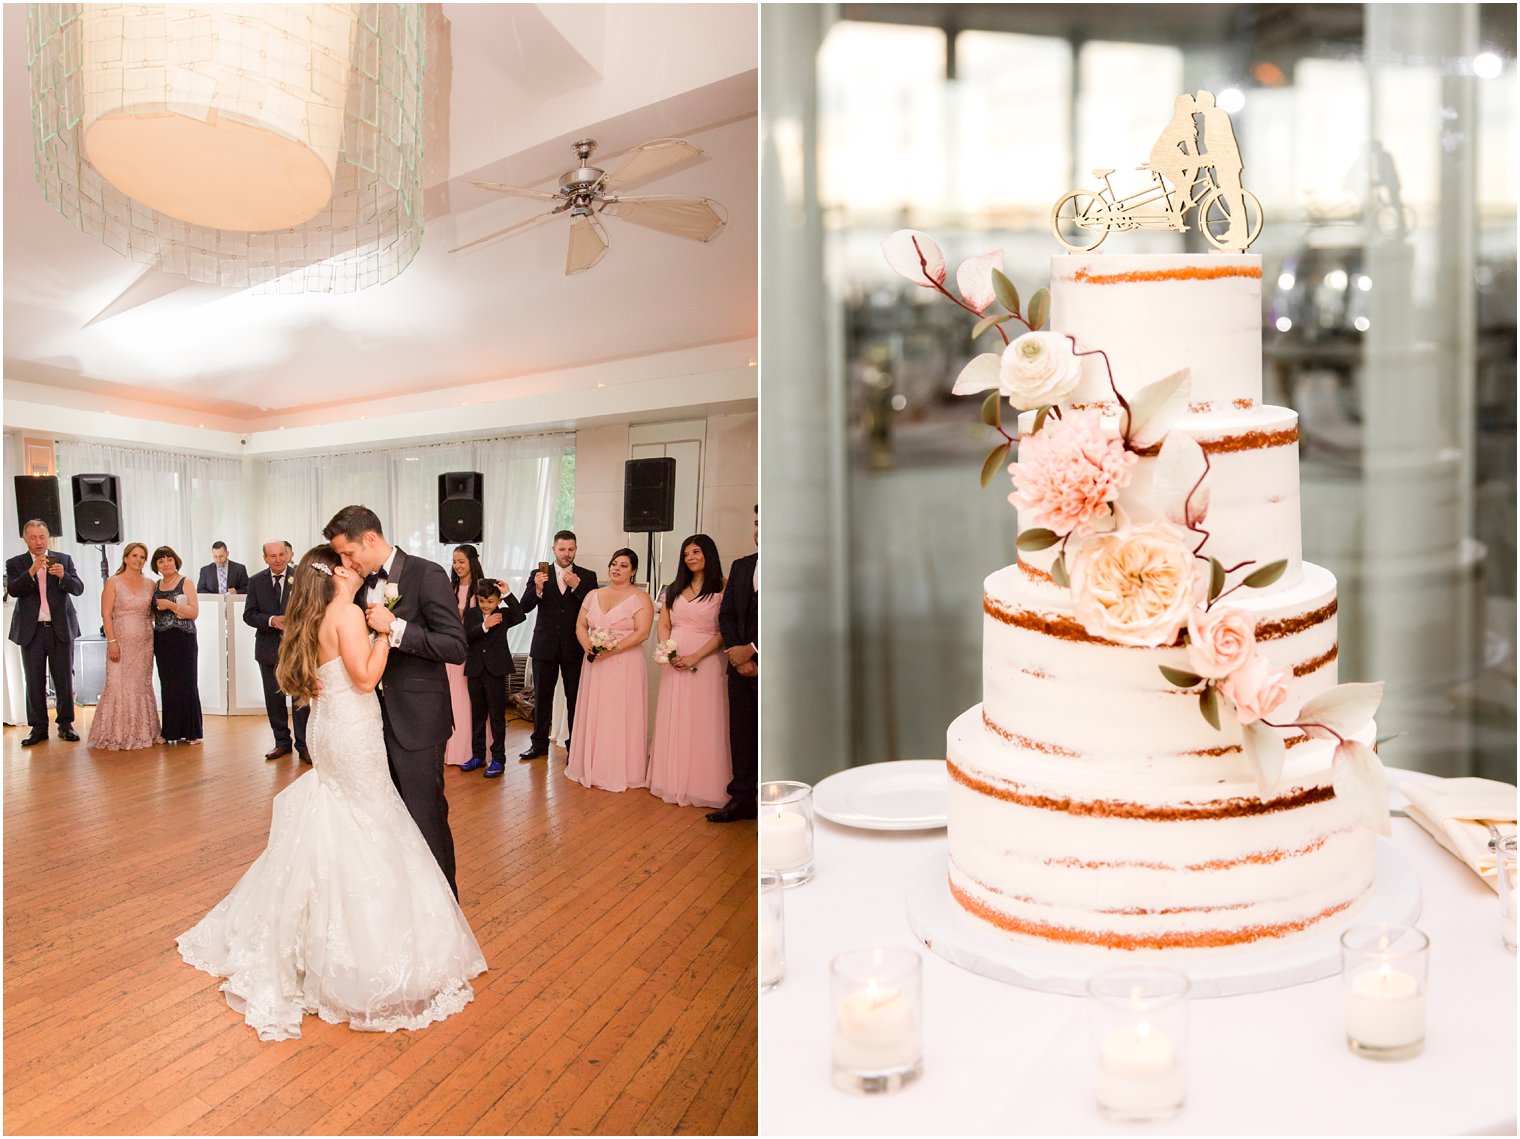 First dance as husband and wife in Battery Gardens Restaurant | Photos by Idalia Photography